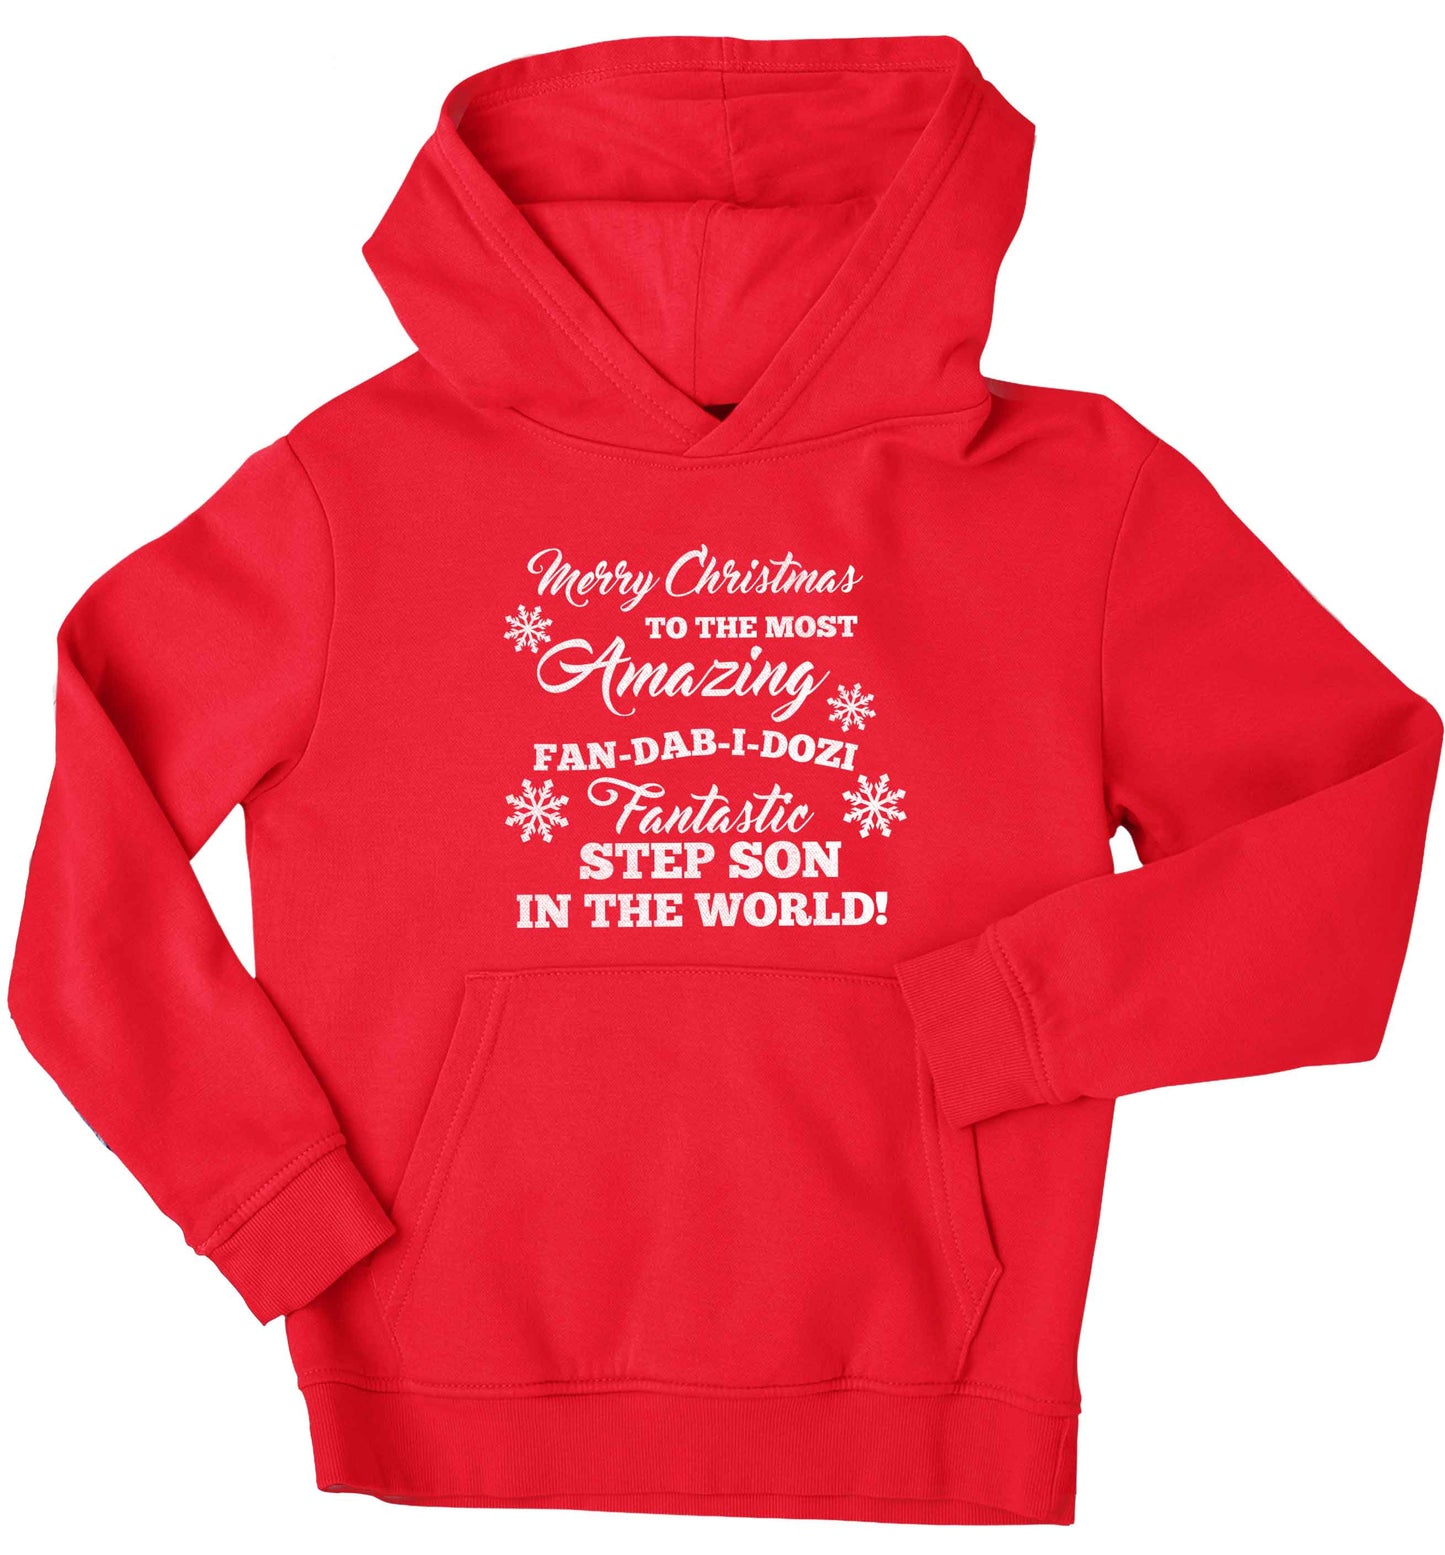 Merry Christmas to the most amazing fan-dab-i-dozi fantasic Step Son in the world children's red hoodie 12-13 Years